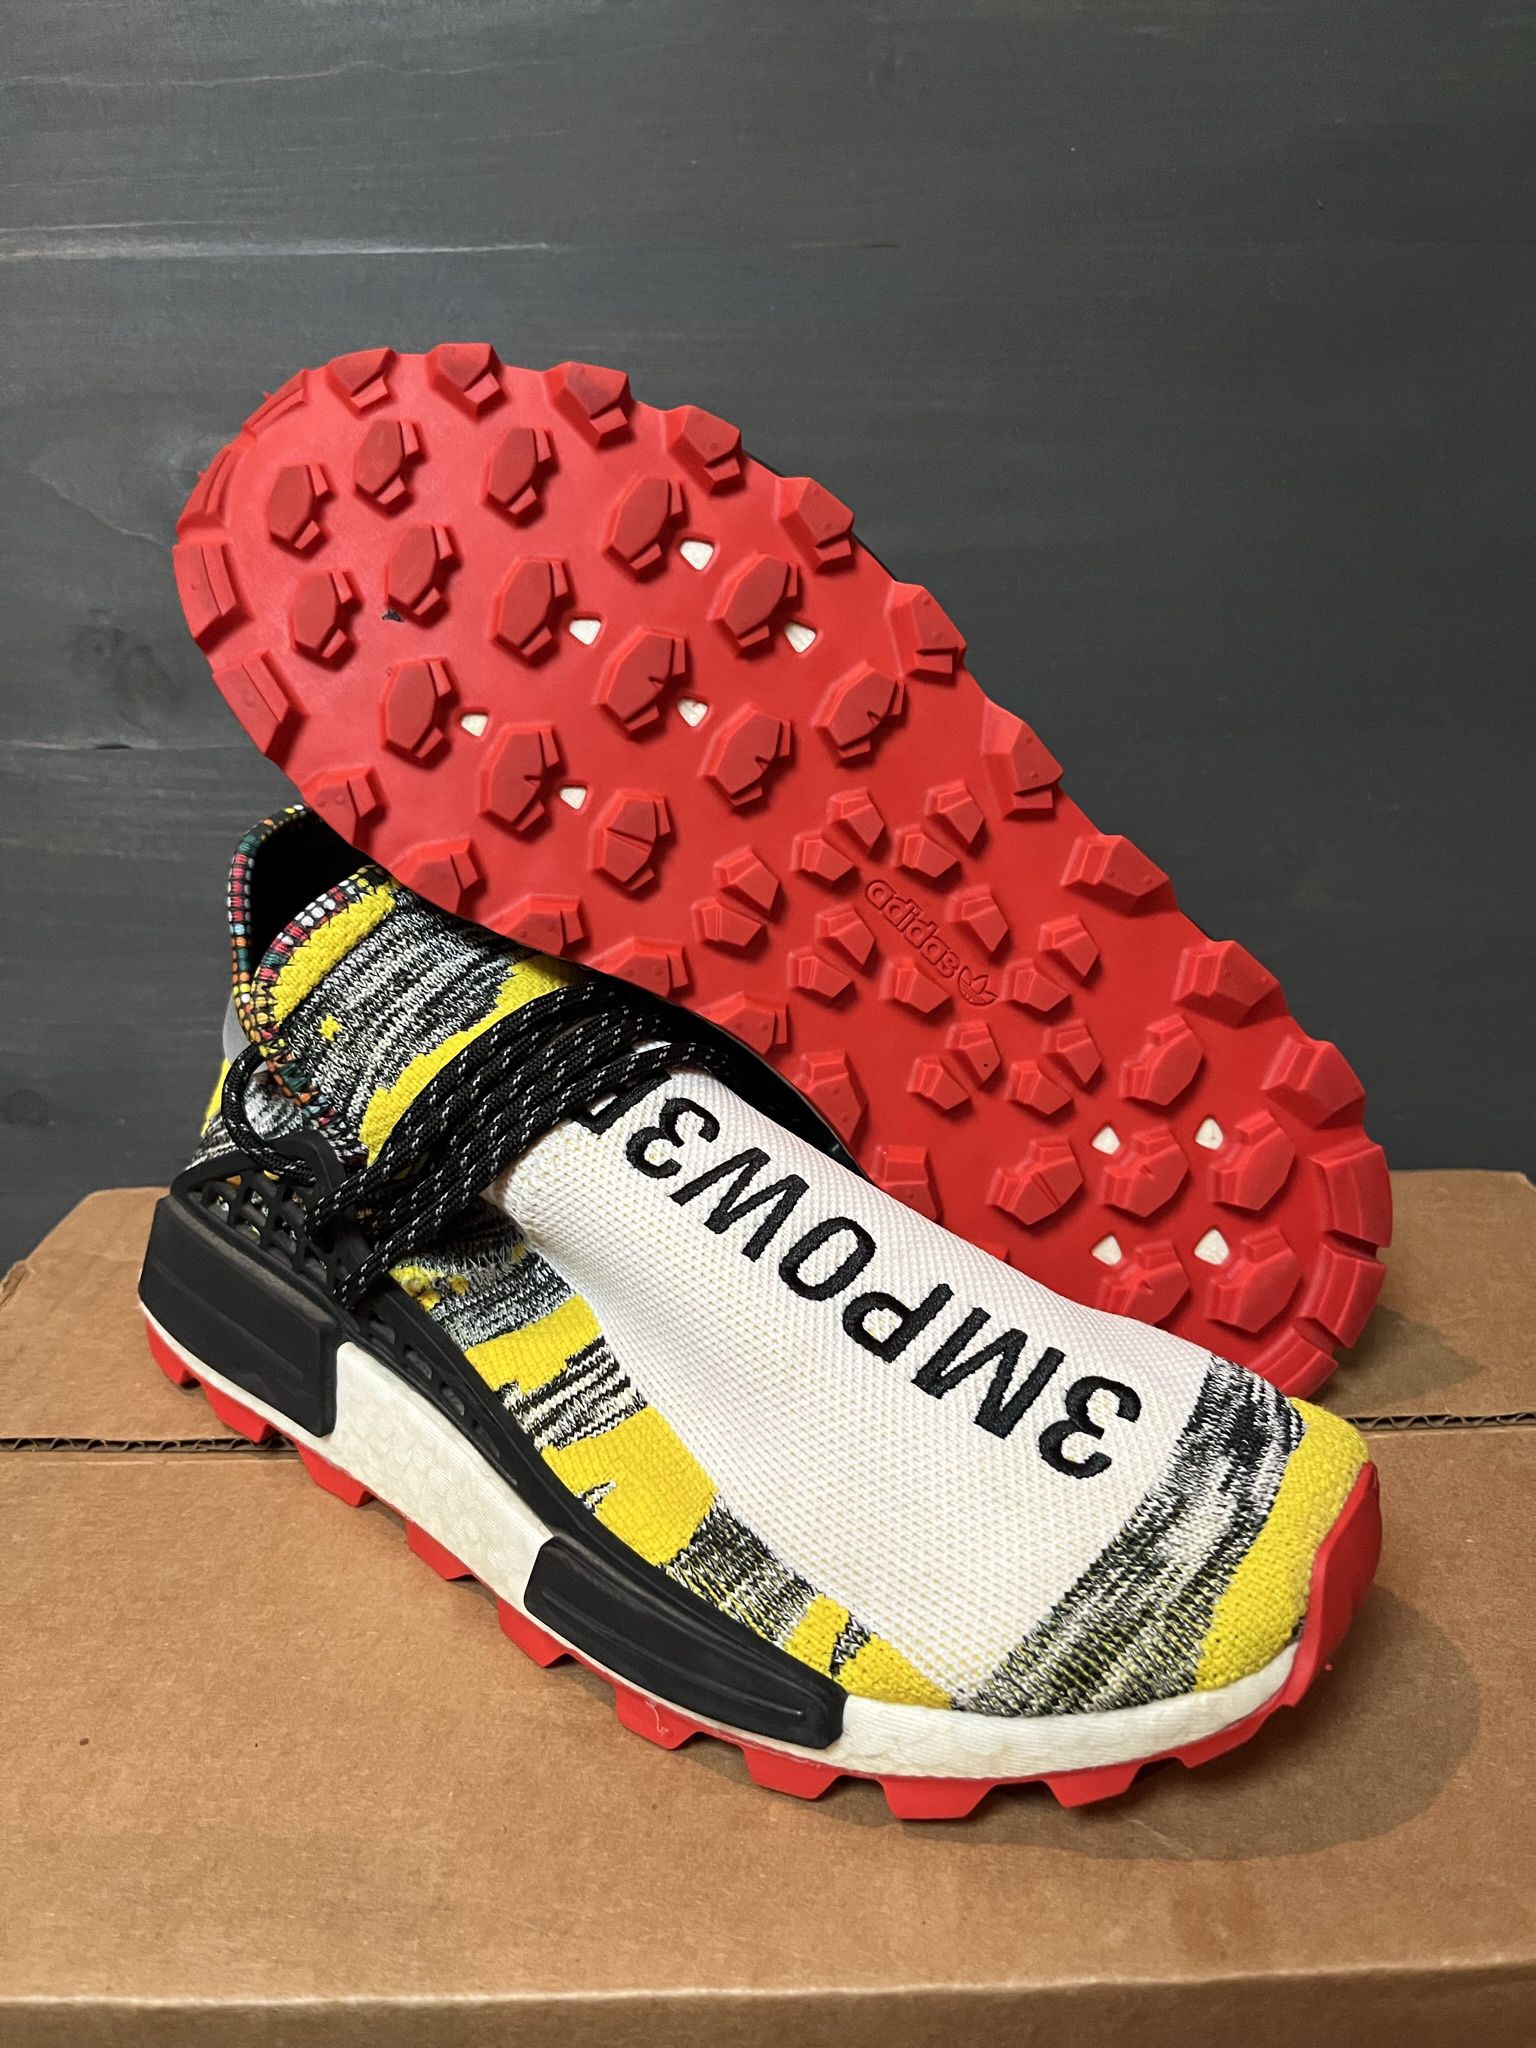 Agent Påvirke Udvidelse Adidas Pharell x NMD Human race Trail “Solar pack” Sz 10.5 for Sale in  Forked River, NJ - OfferUp